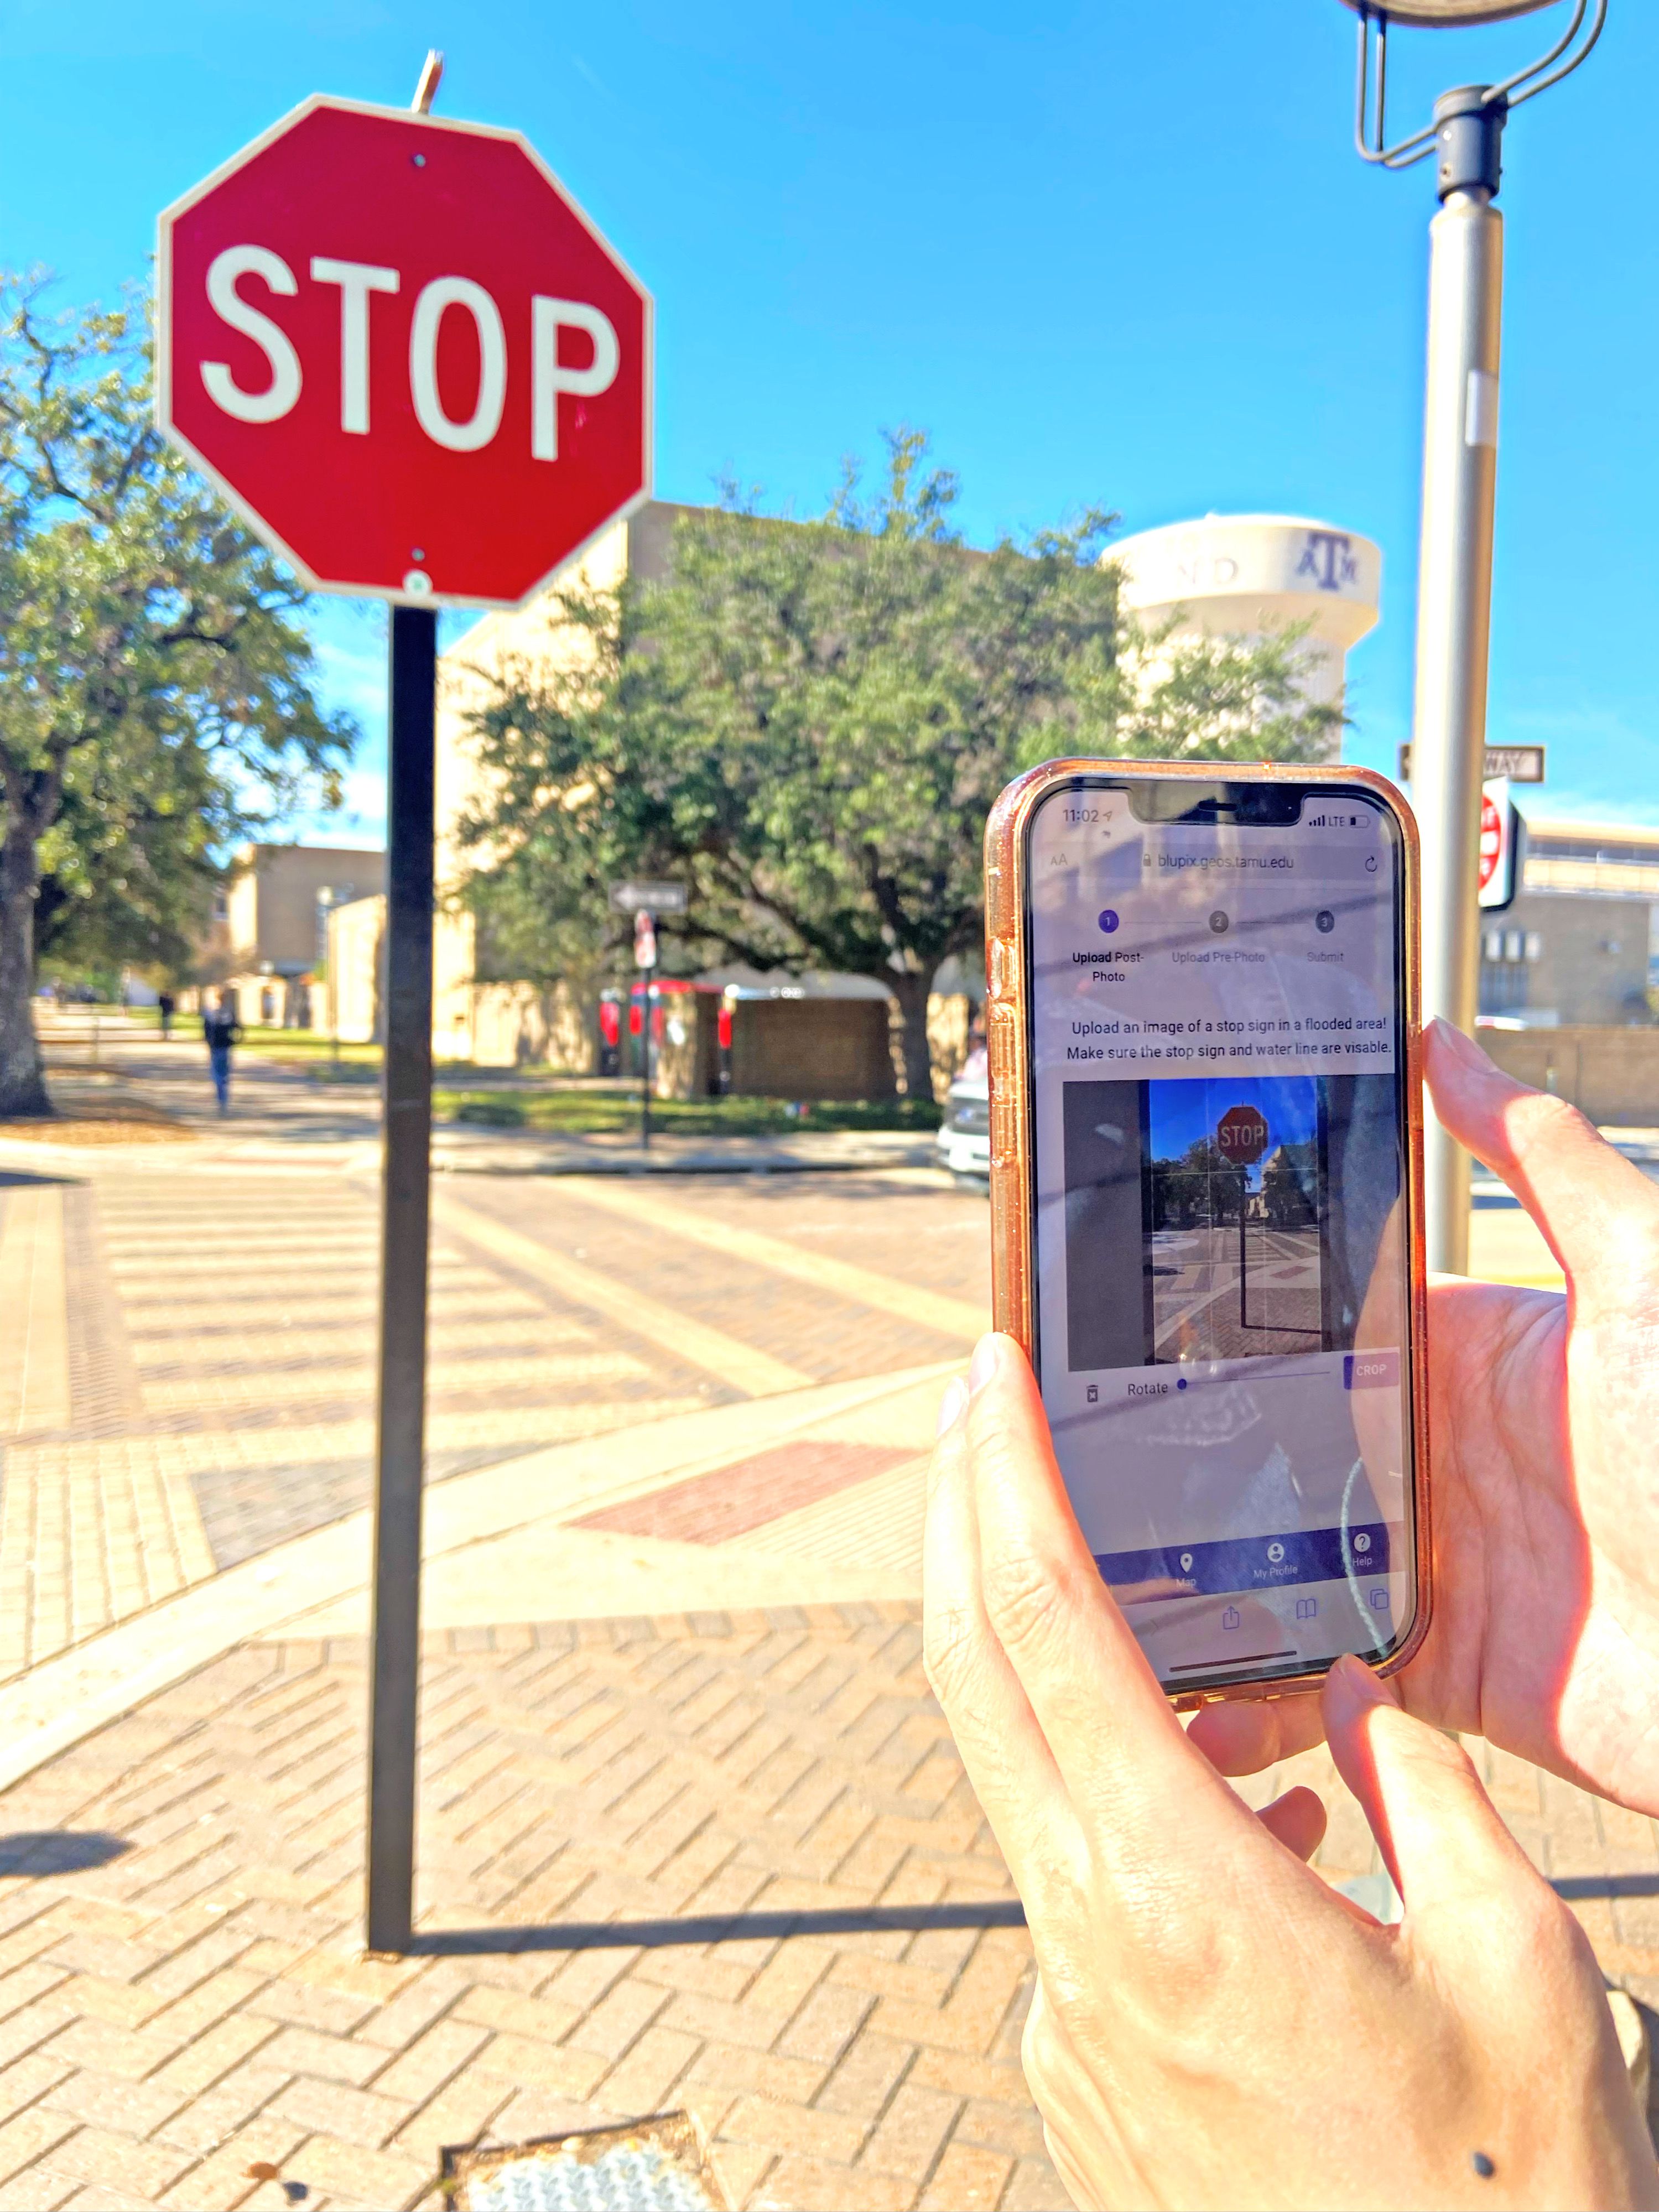 A smart phone taking a photo of a stop sign